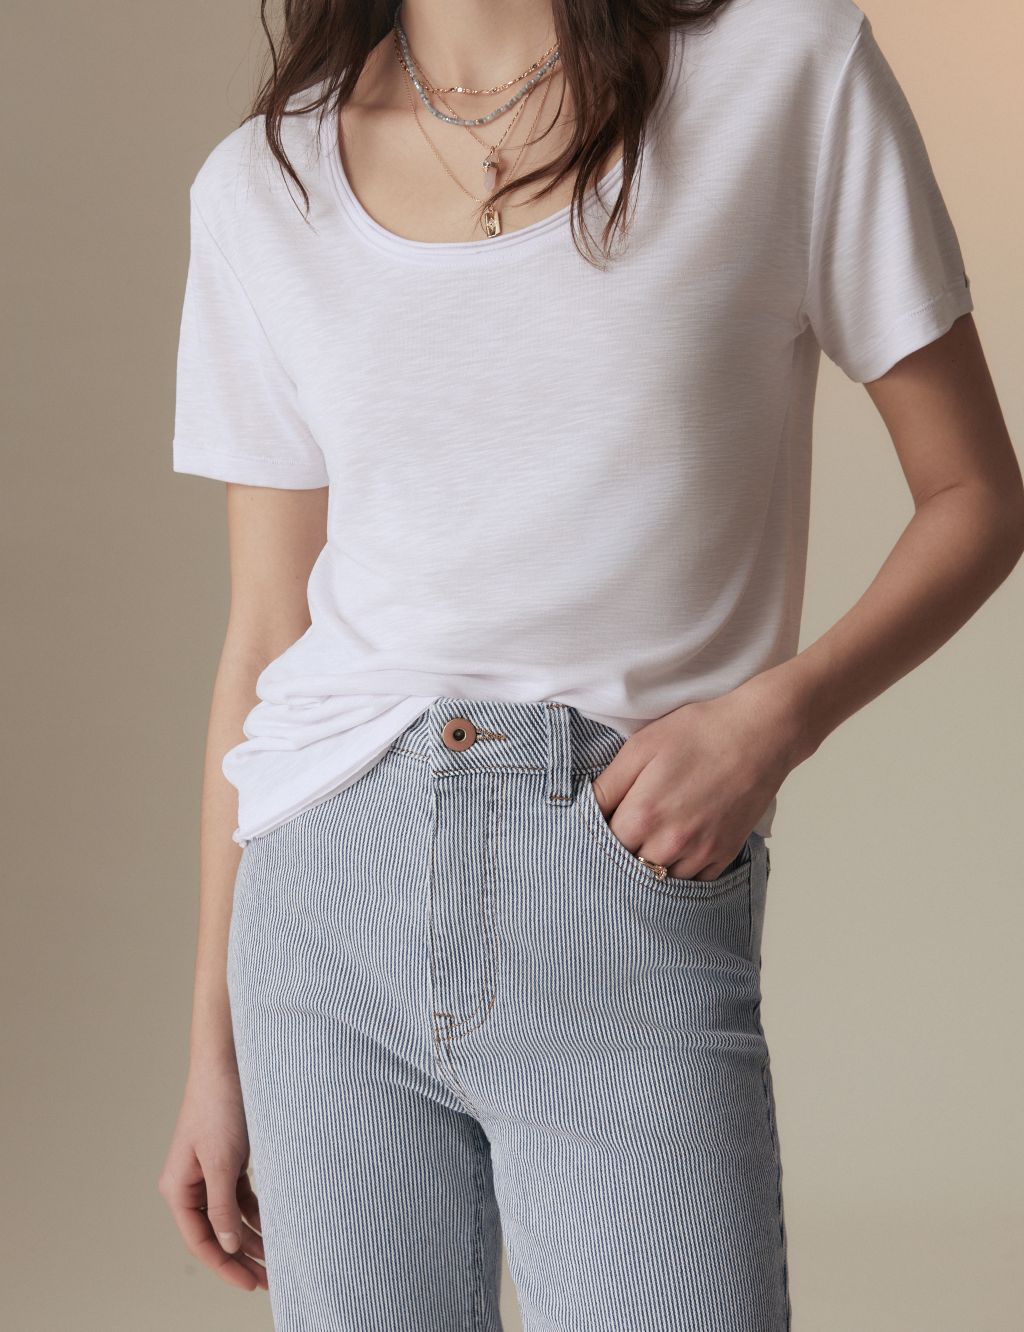 Girlfriend High Waisted Tapered Jeans 2 of 7